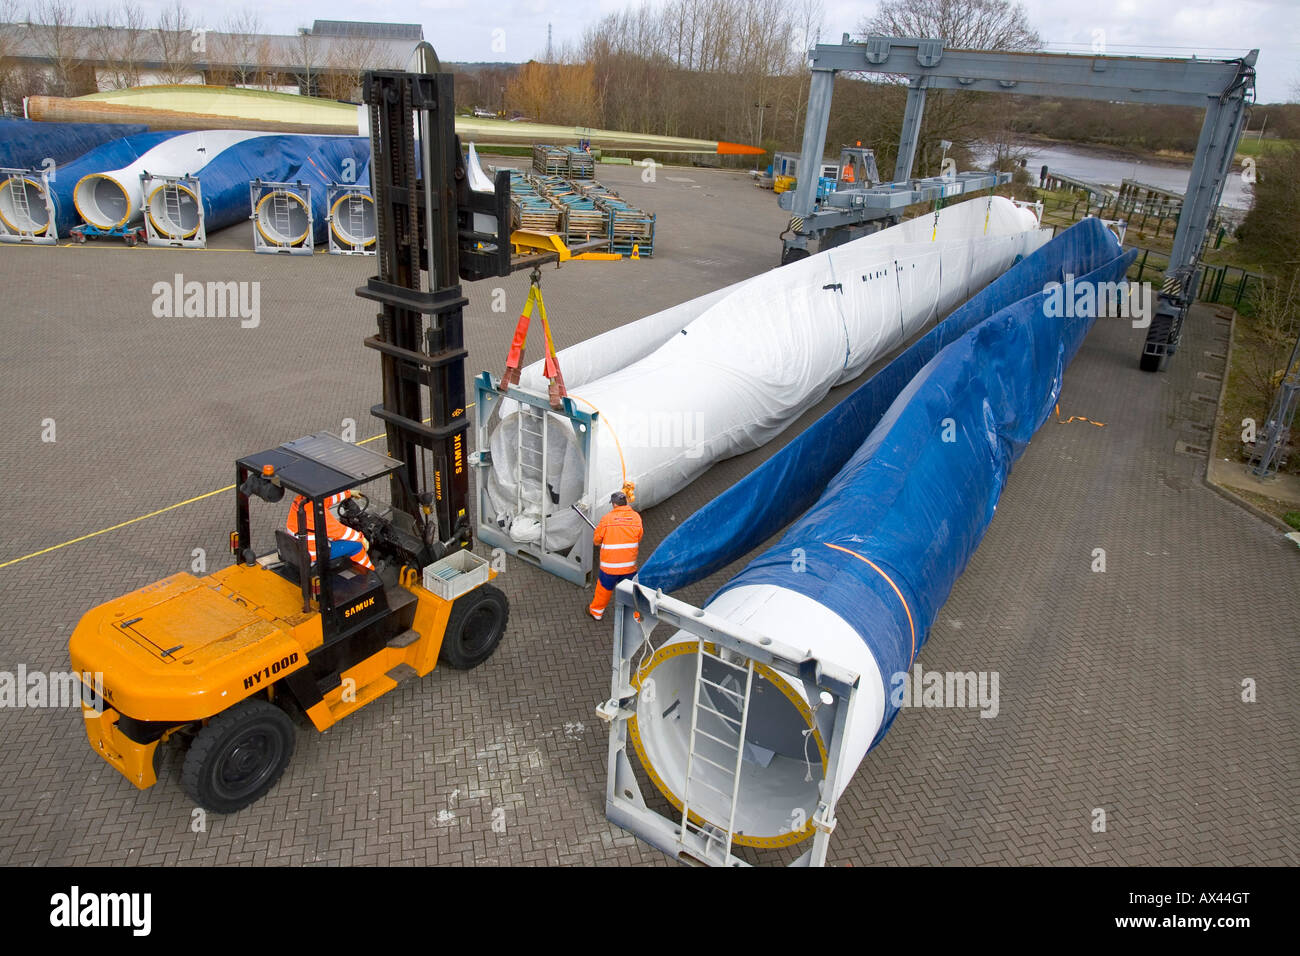 Loading blades for transport by sea Vestas Windturbine Manufacturers  Newport Isle of Wight England UK Stock Photo - Alamy